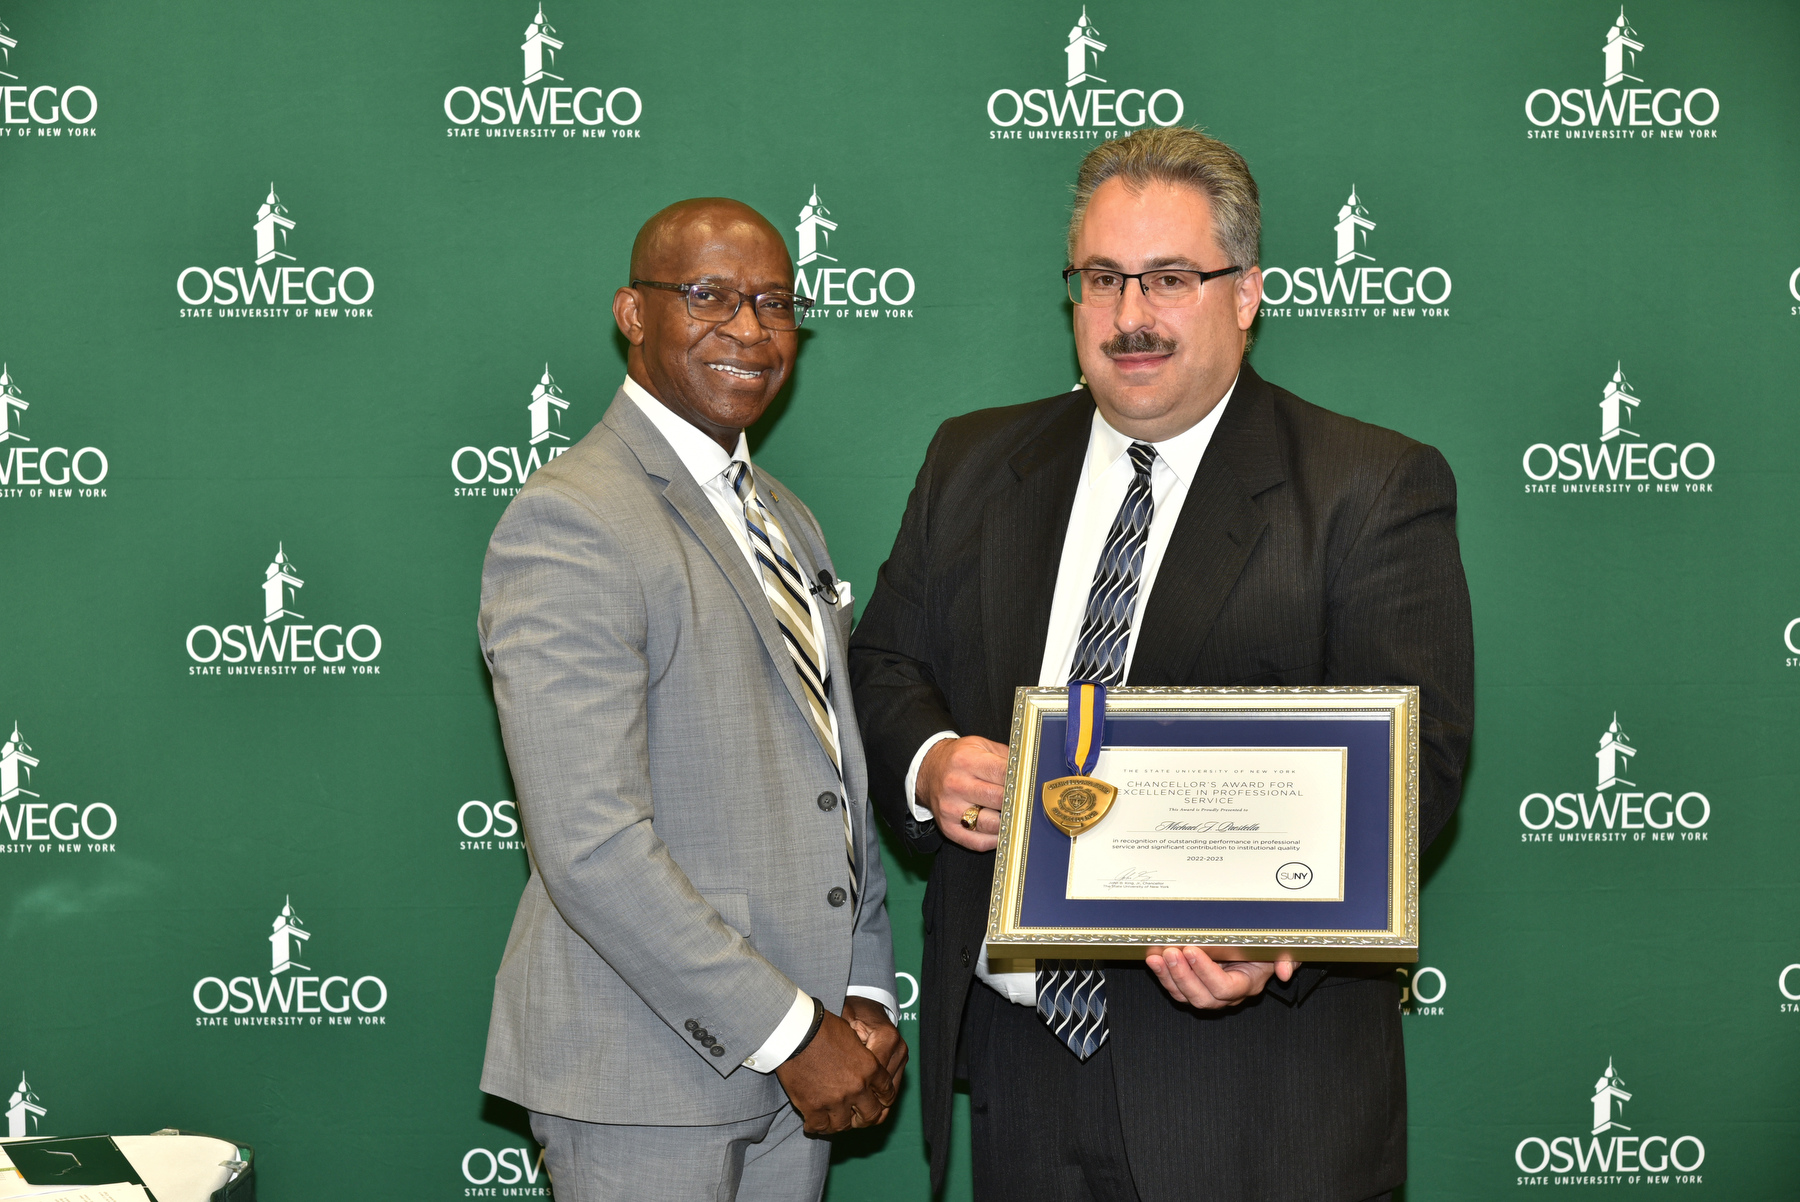 The SUNY Chancellor's Award for Excellence in Professional Service was officially presented to Michael Paestella by President Peter O. Nwosu during the Opening Breakfast.